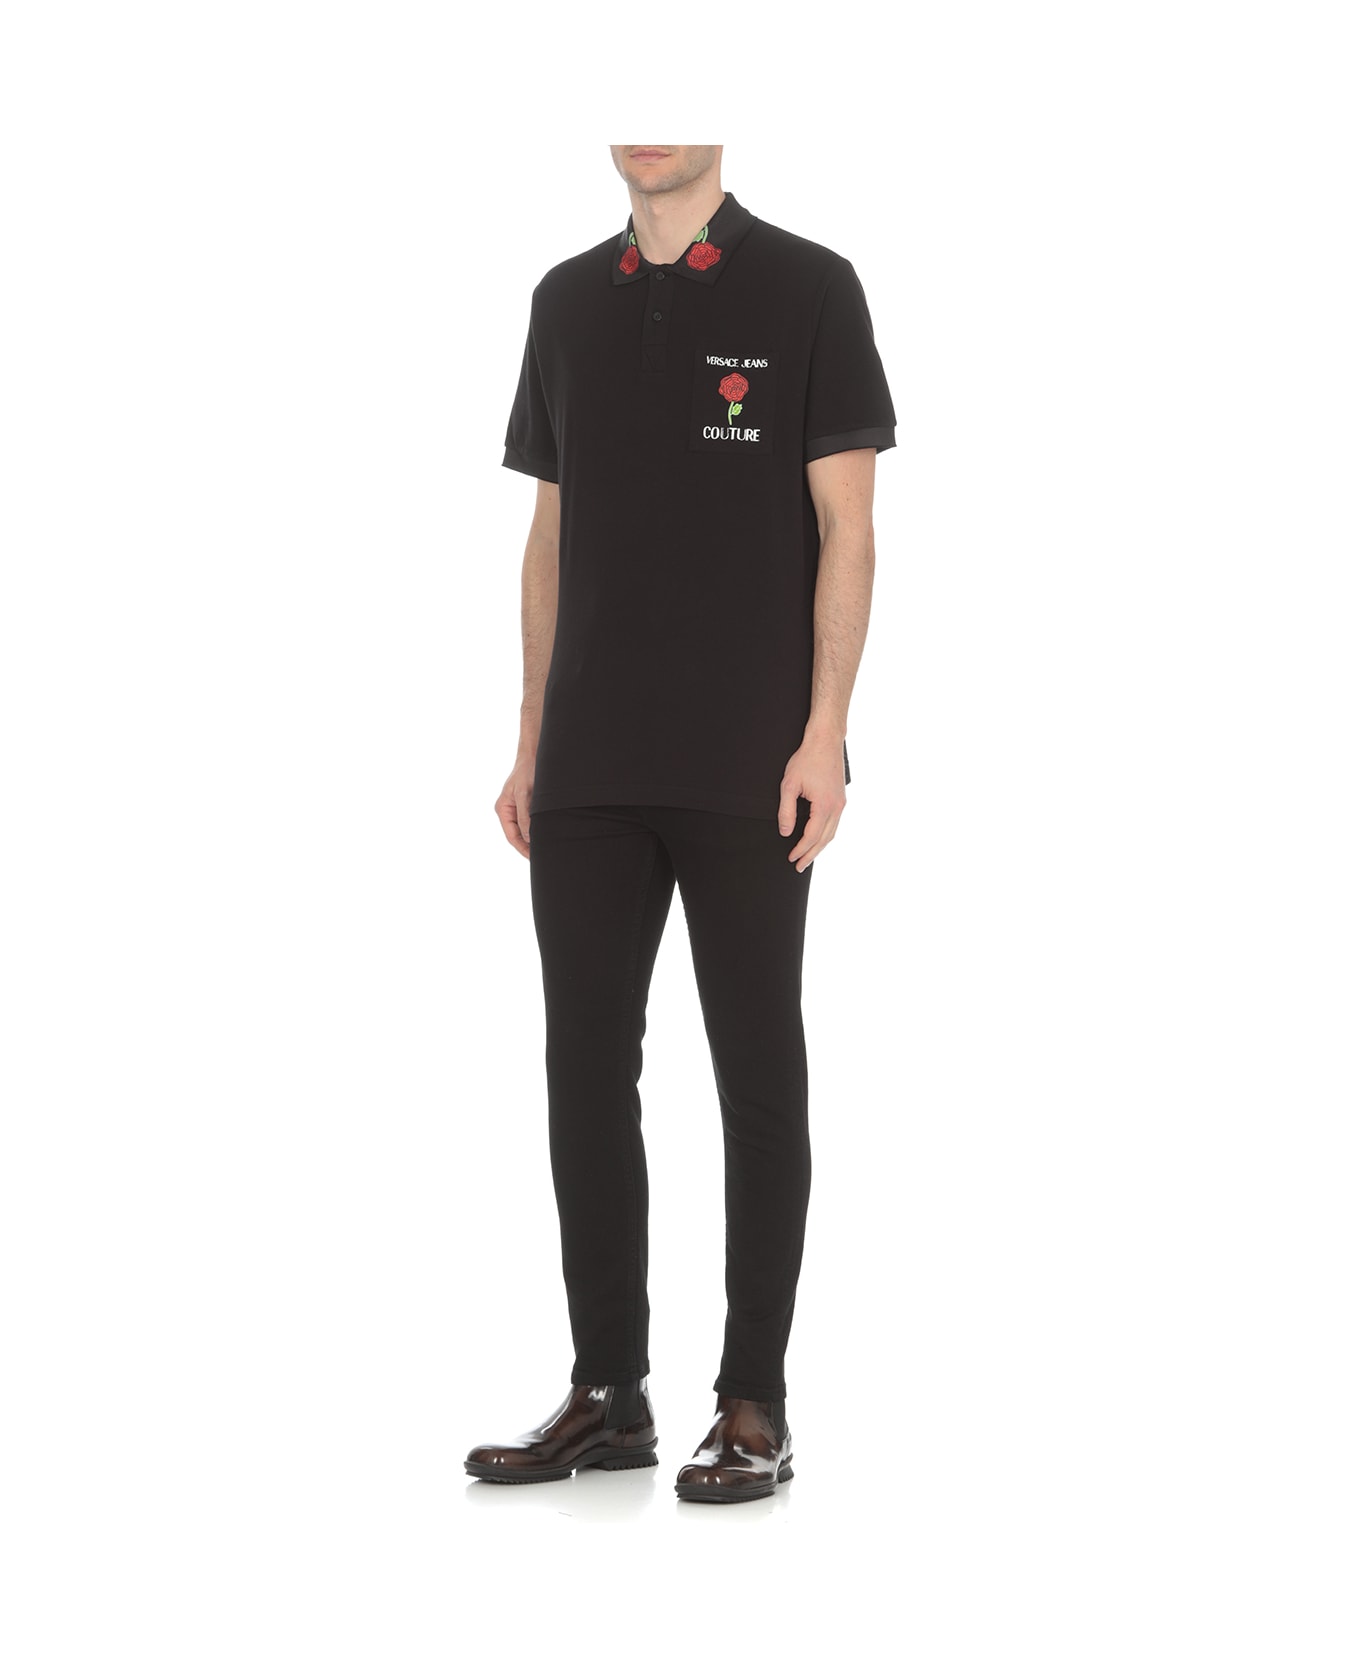 Versace Jeans Couture Polo - Black